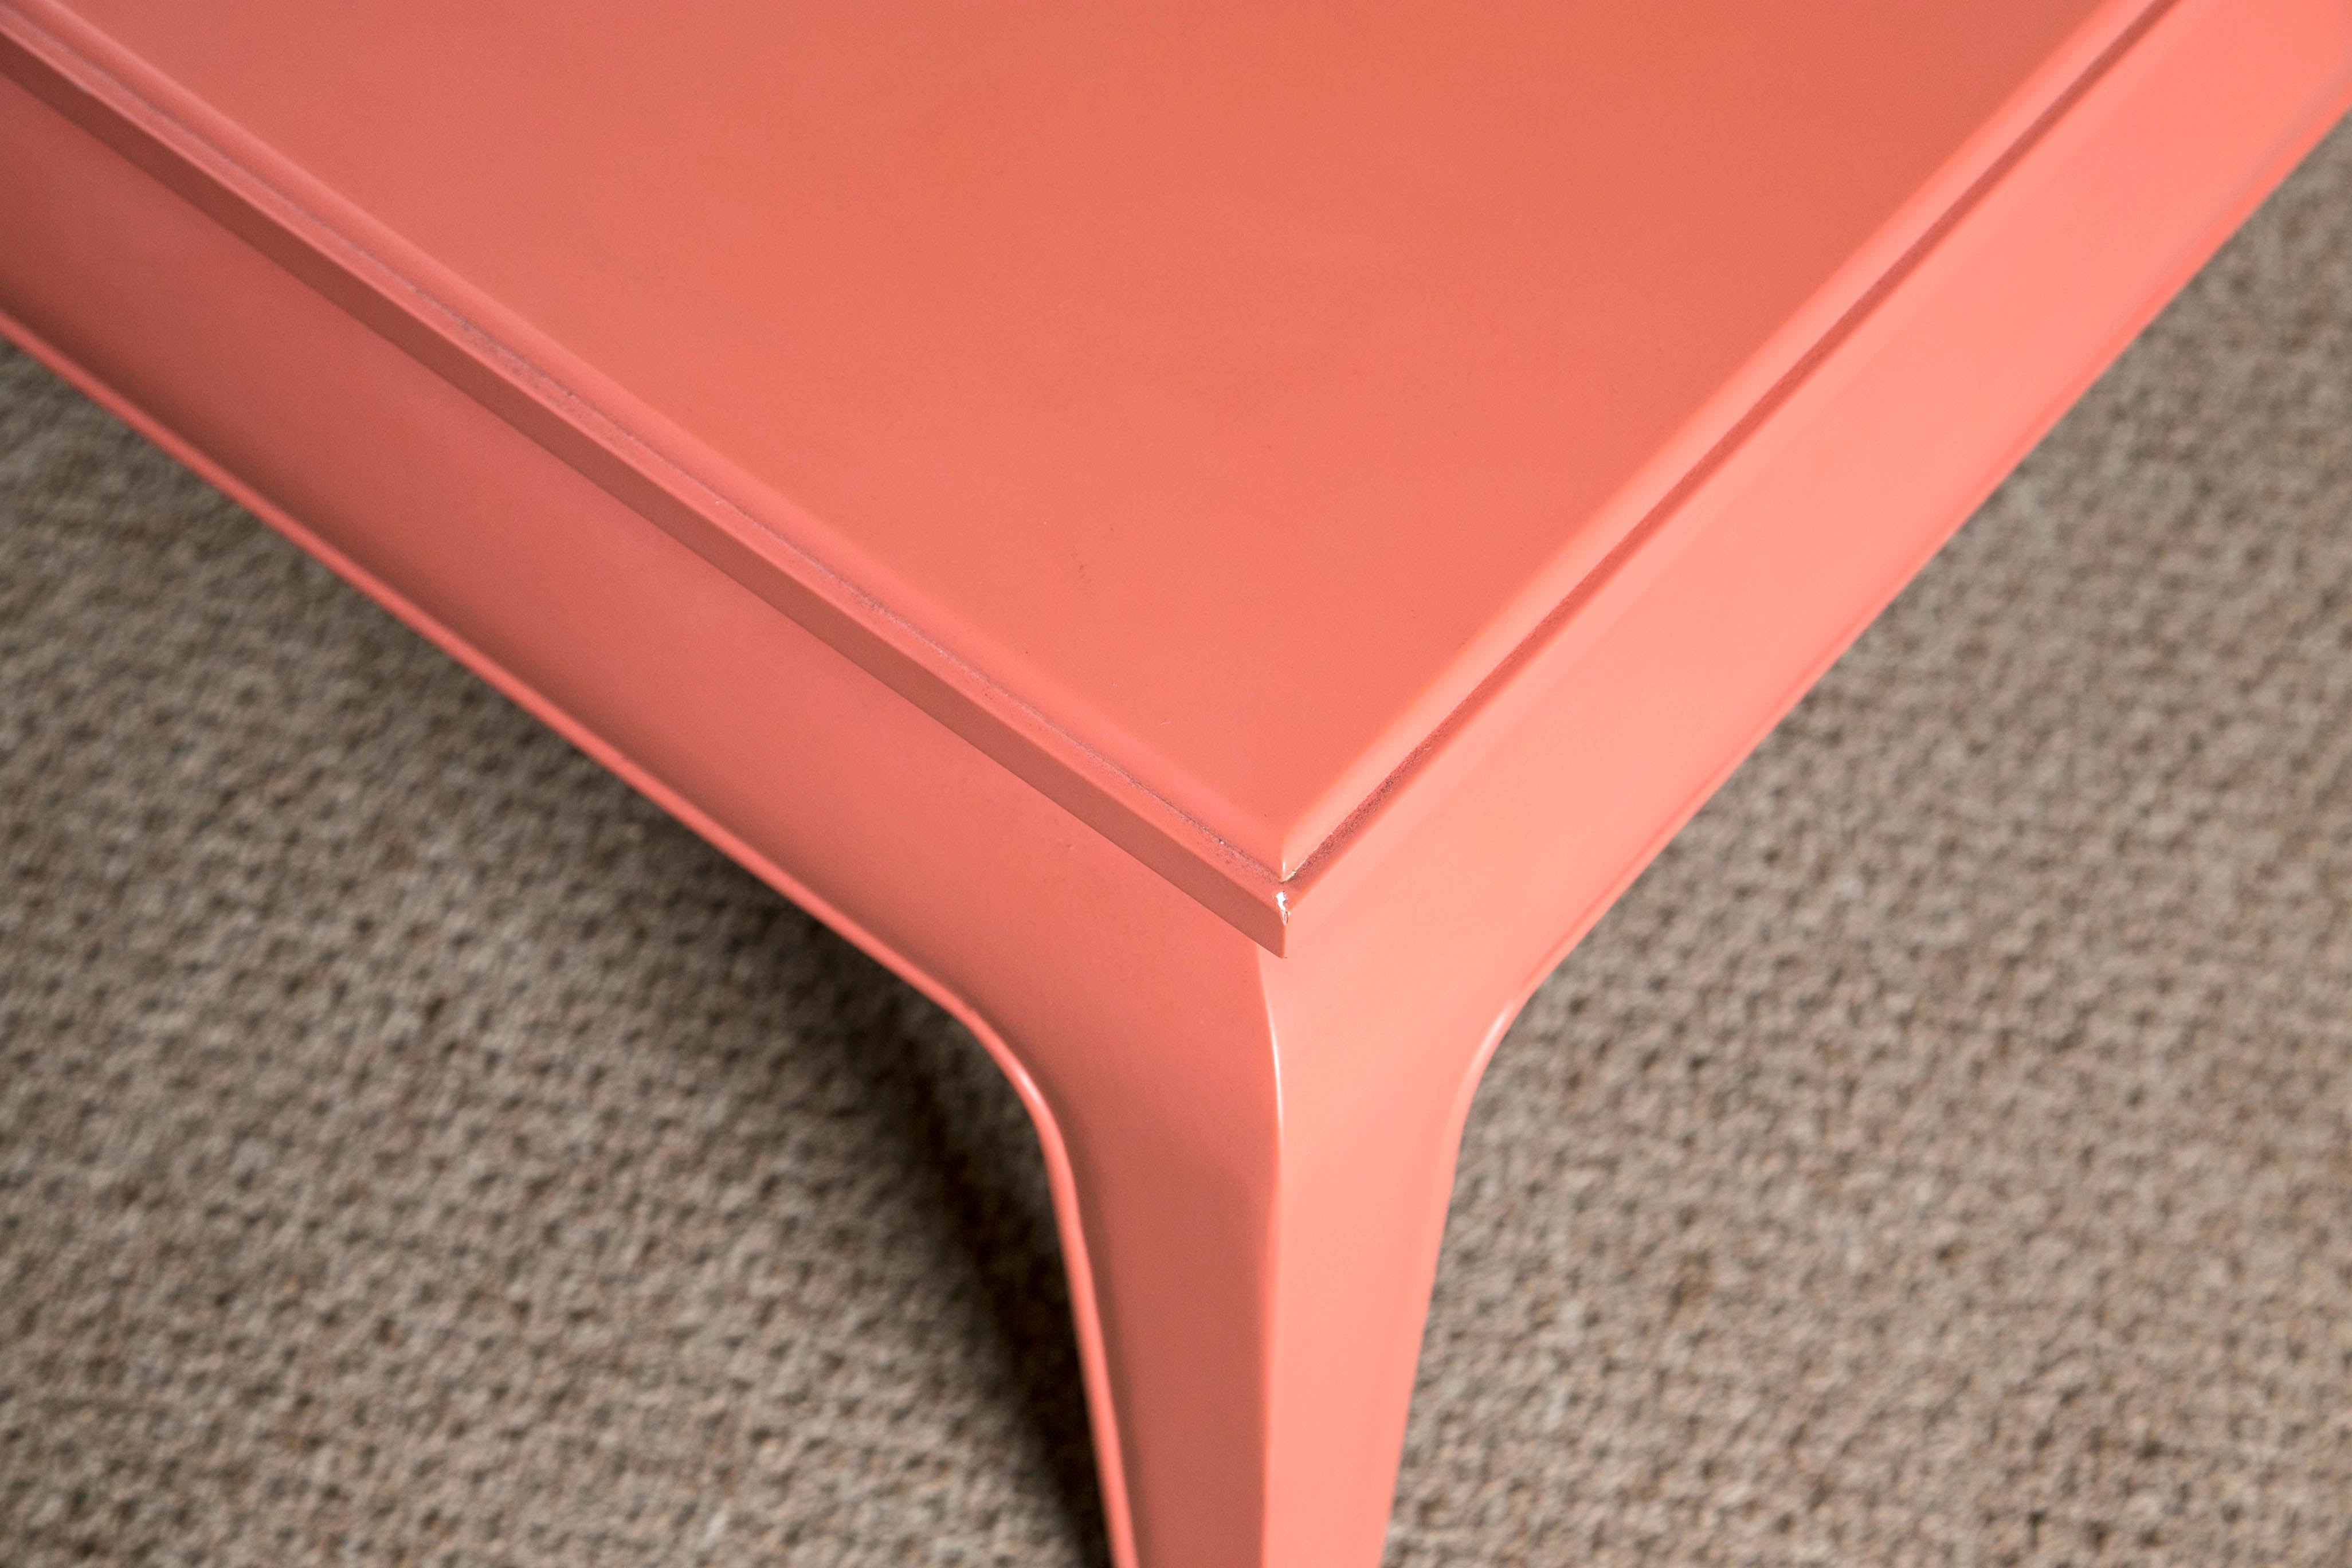 Ralph Lauren brook street cocktail table. Versatile cocktail table with a great salmon color. This piece was designed for a beach theme or a mansion on a hill. Adding color and solid structure to an everyday piece. Ralph Lauren Brook Street cocktail